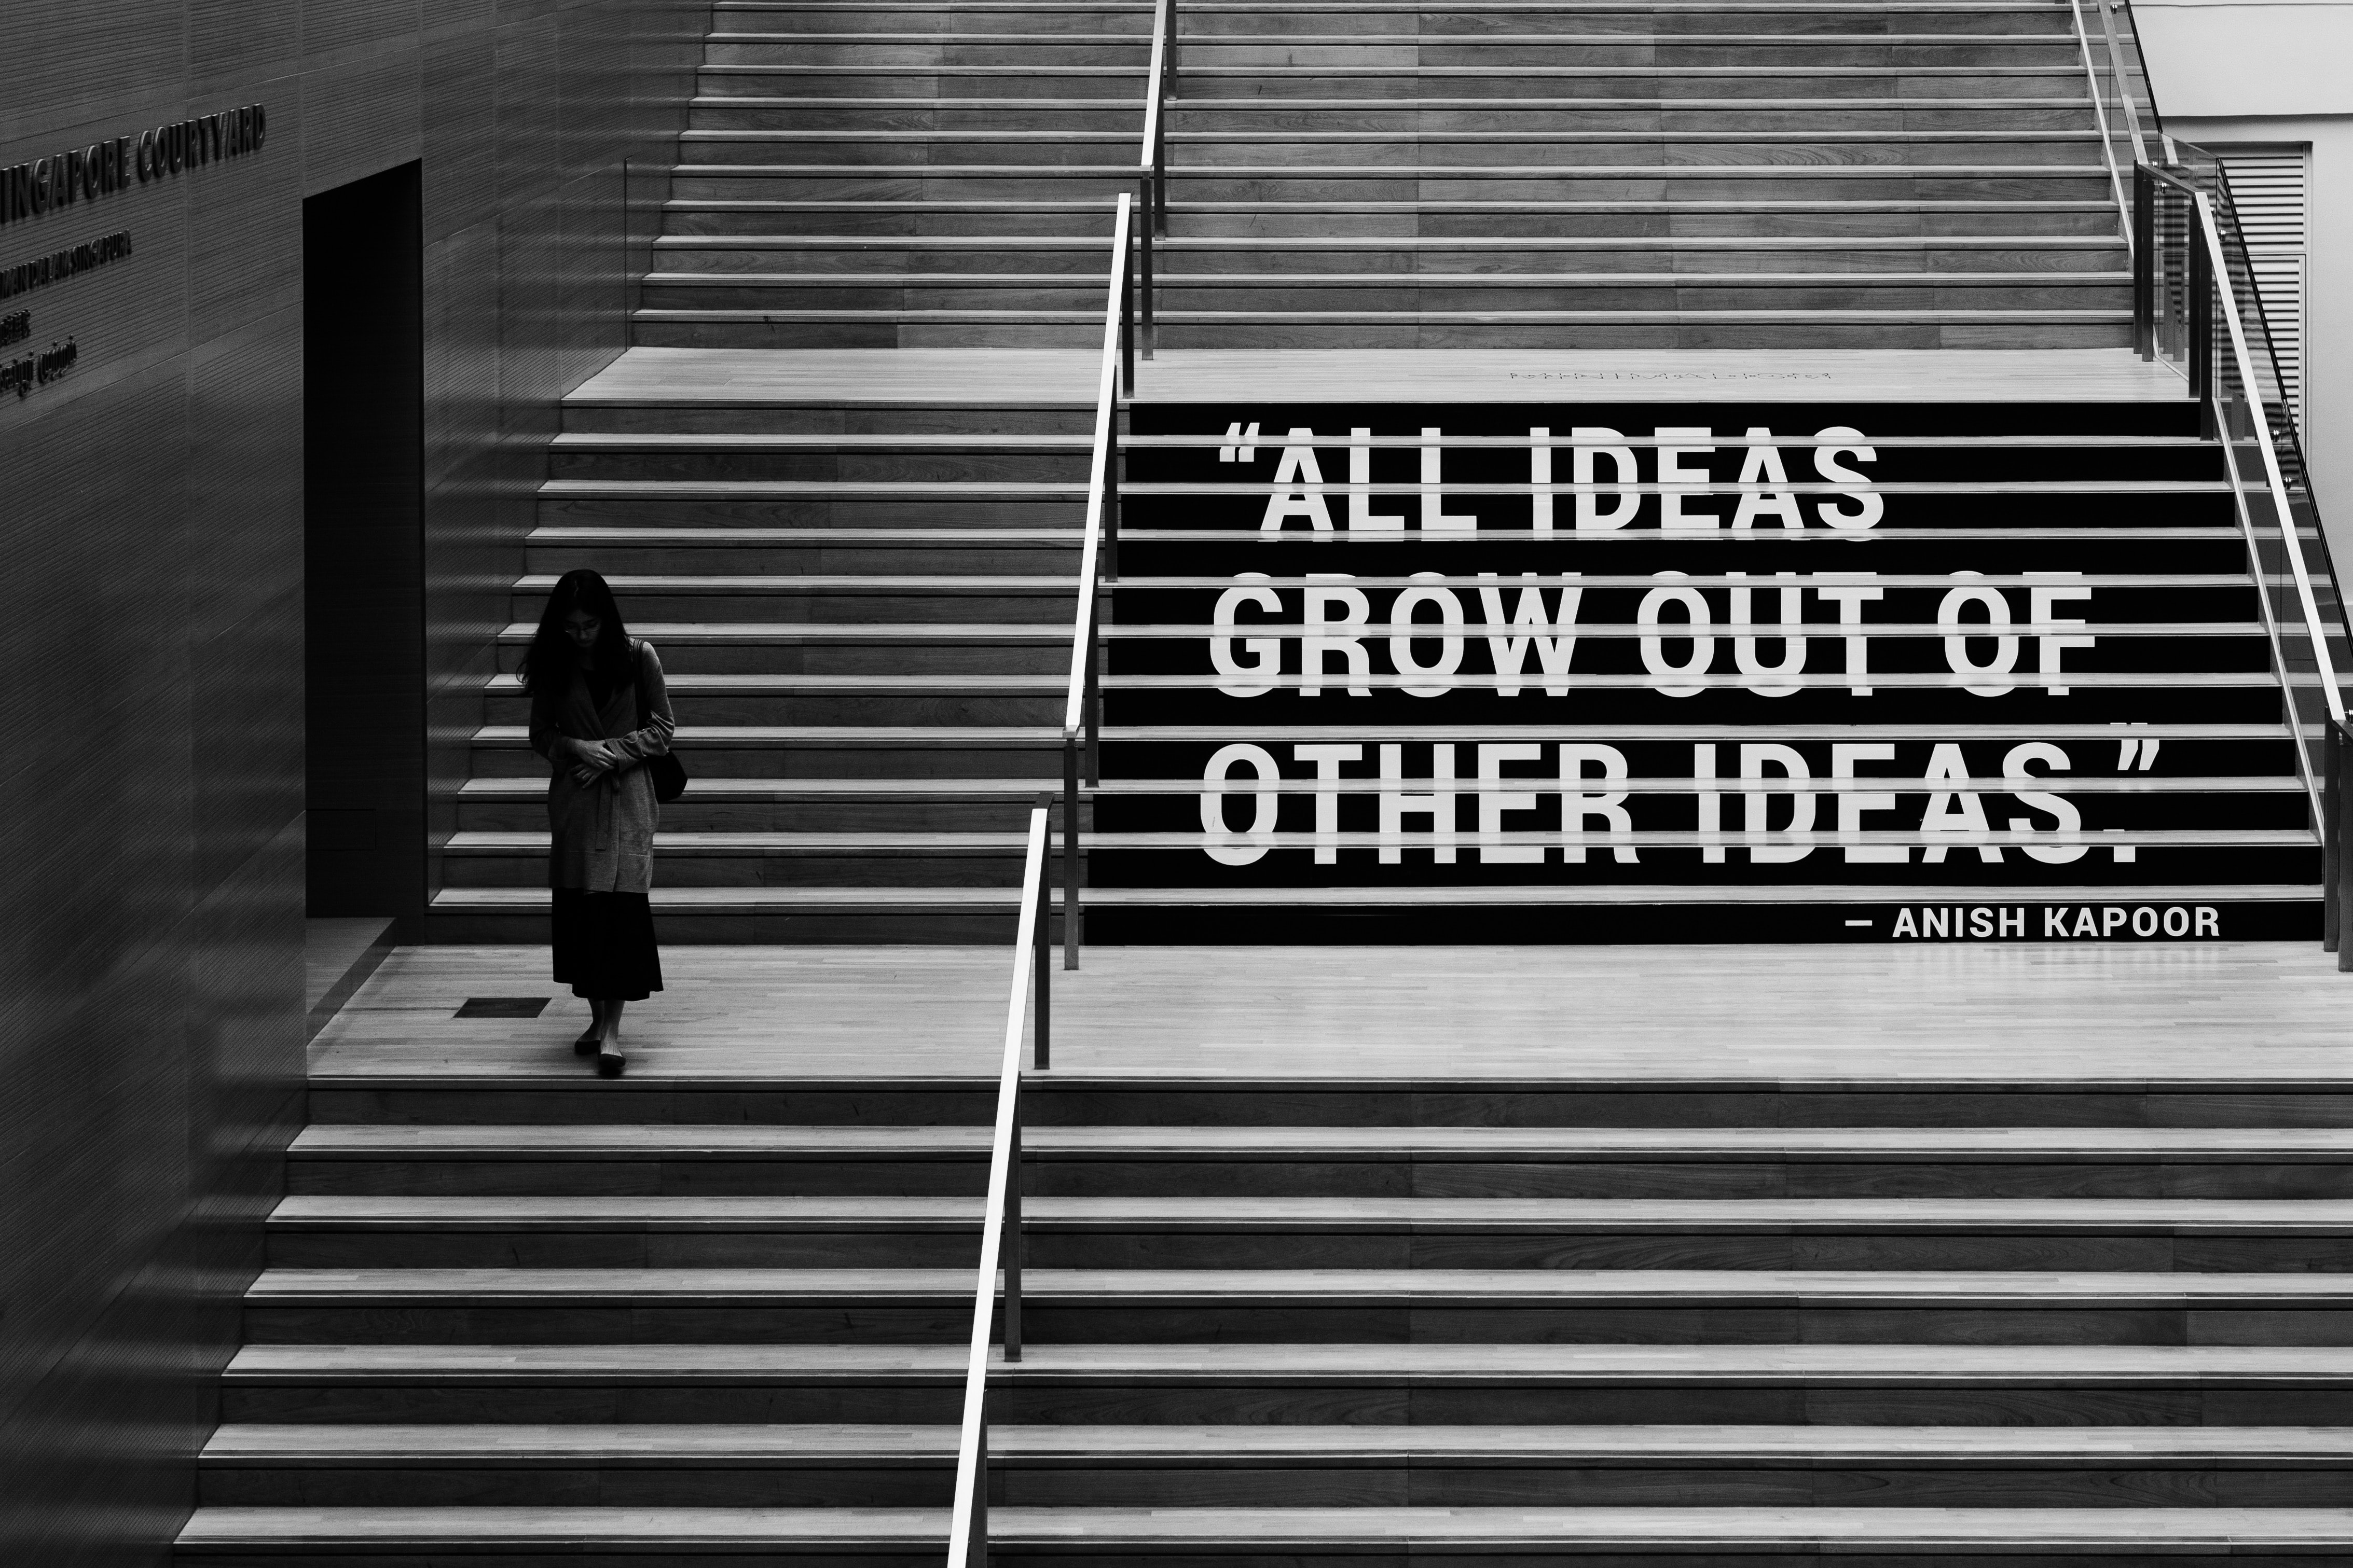 "All ideas grow out of other ideas"